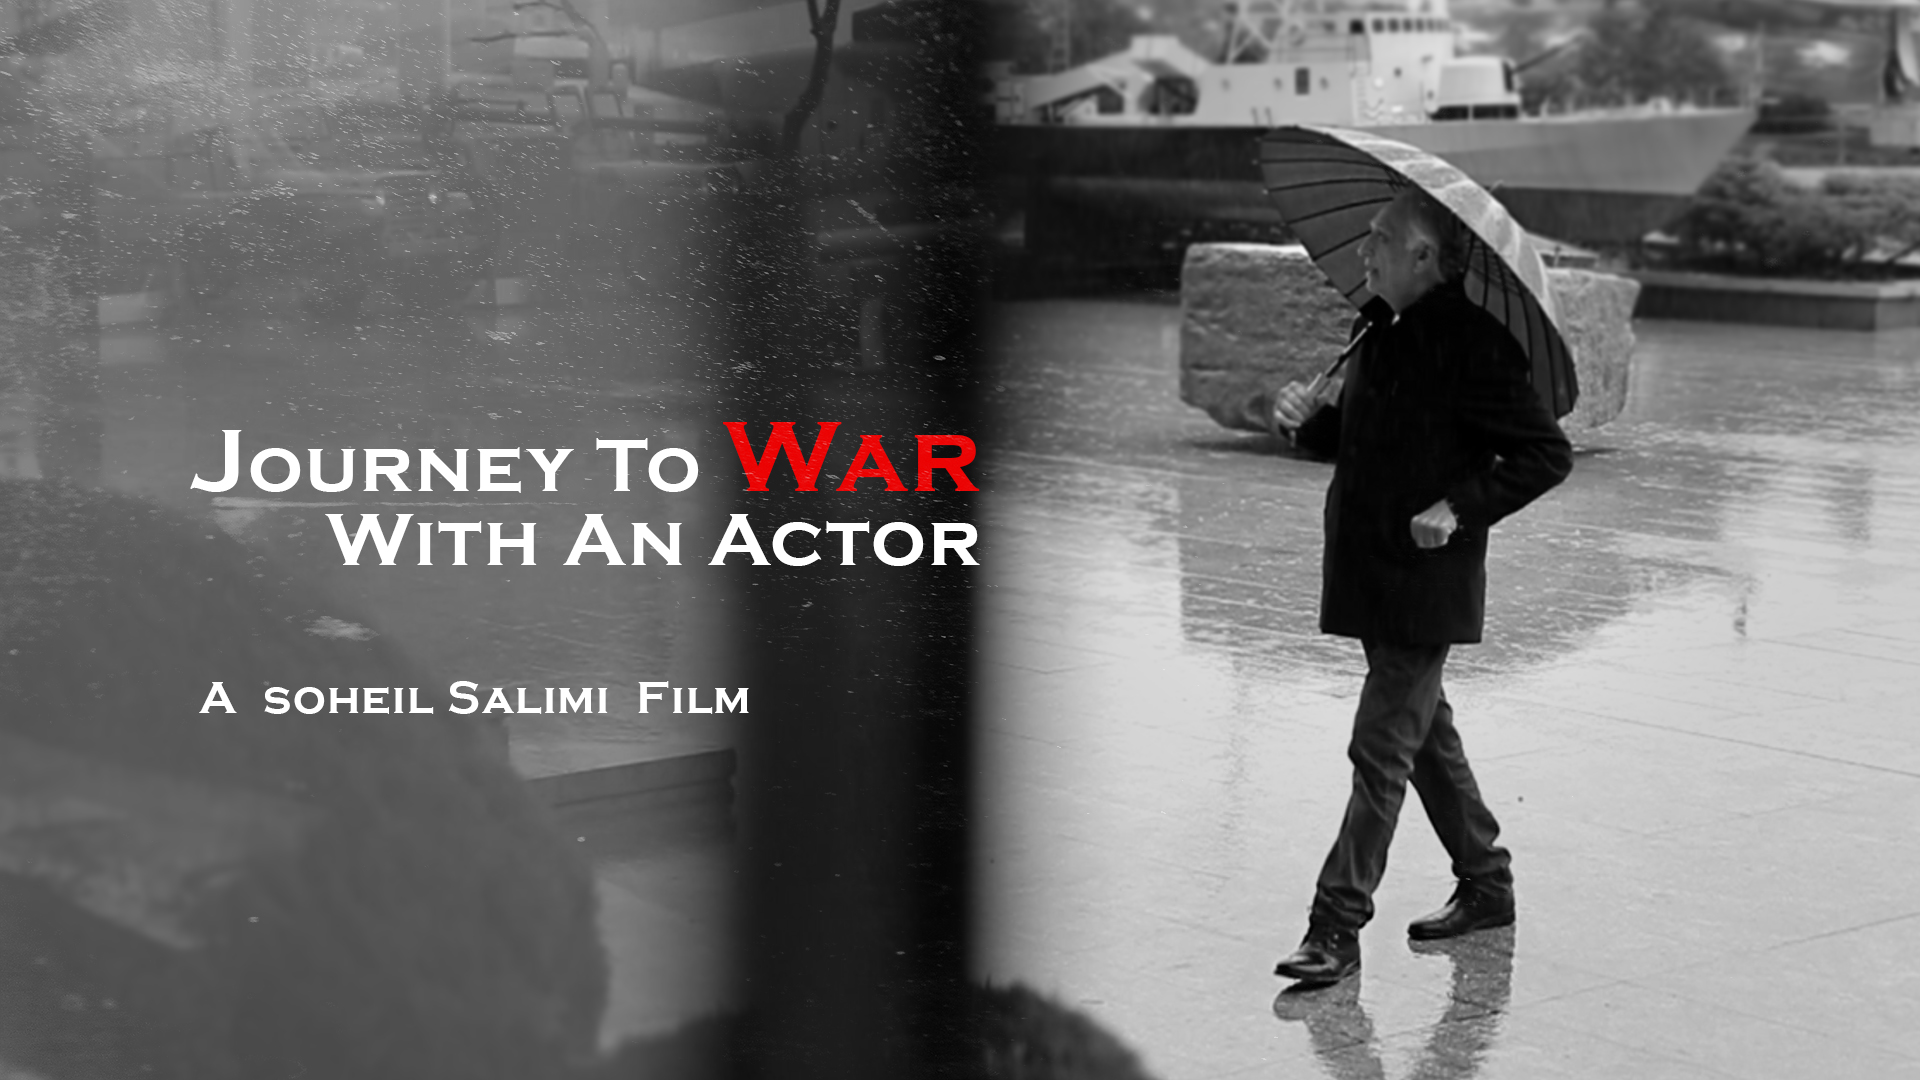 Journey To War With An Actor Contest Name :Documentary Competition #4, Submission Date :08-15-2019, Uploaded By : Soheil Directed By :  Soheil Salimi, Director & Writer & Editor,, Shot On: Iran,   Crew Members: 7  Duration: 4.52 mins Tehran ,Shahriyar , Iran   Views: 410 Inspiration: This short documentary is a reminder of the first encounter of a movie actor with a very bloody and terrible war.